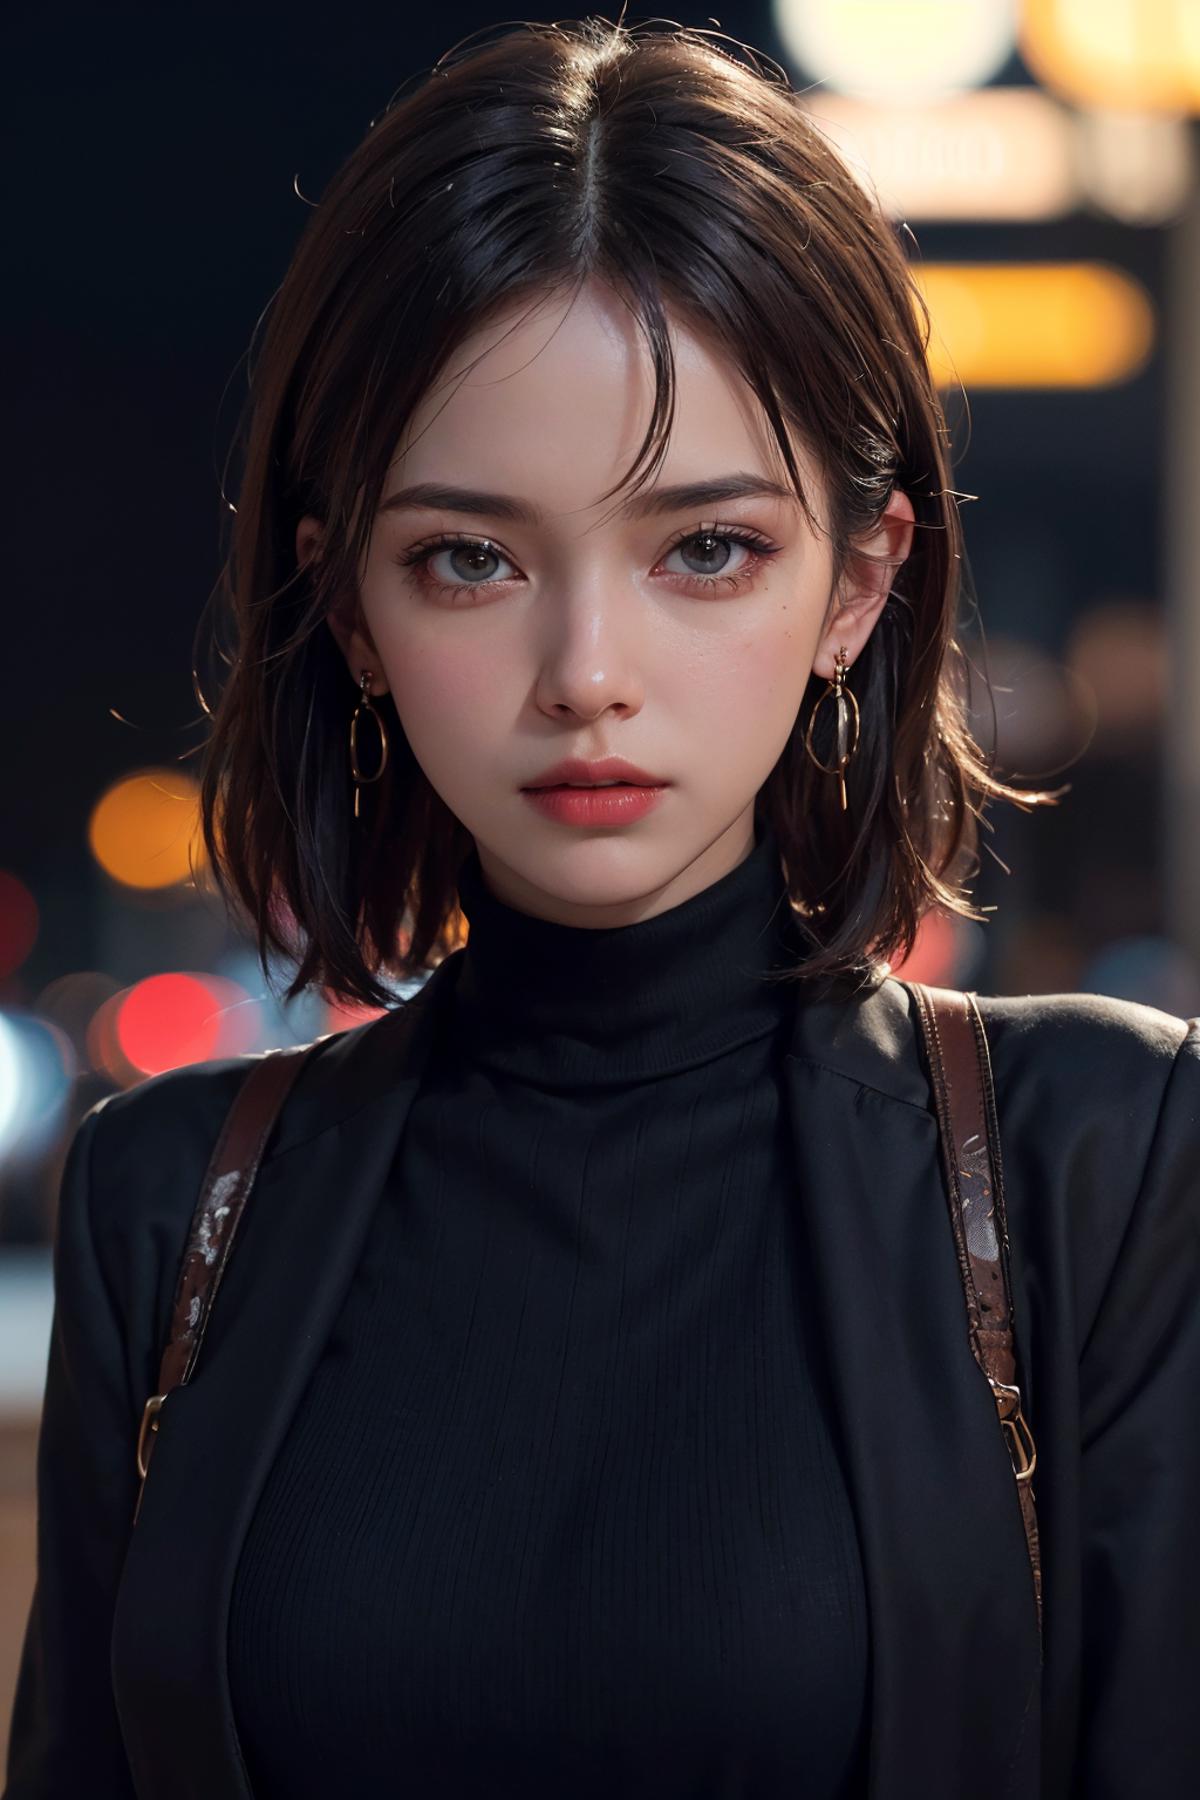 A woman wearing a black turtleneck and earrings at night.